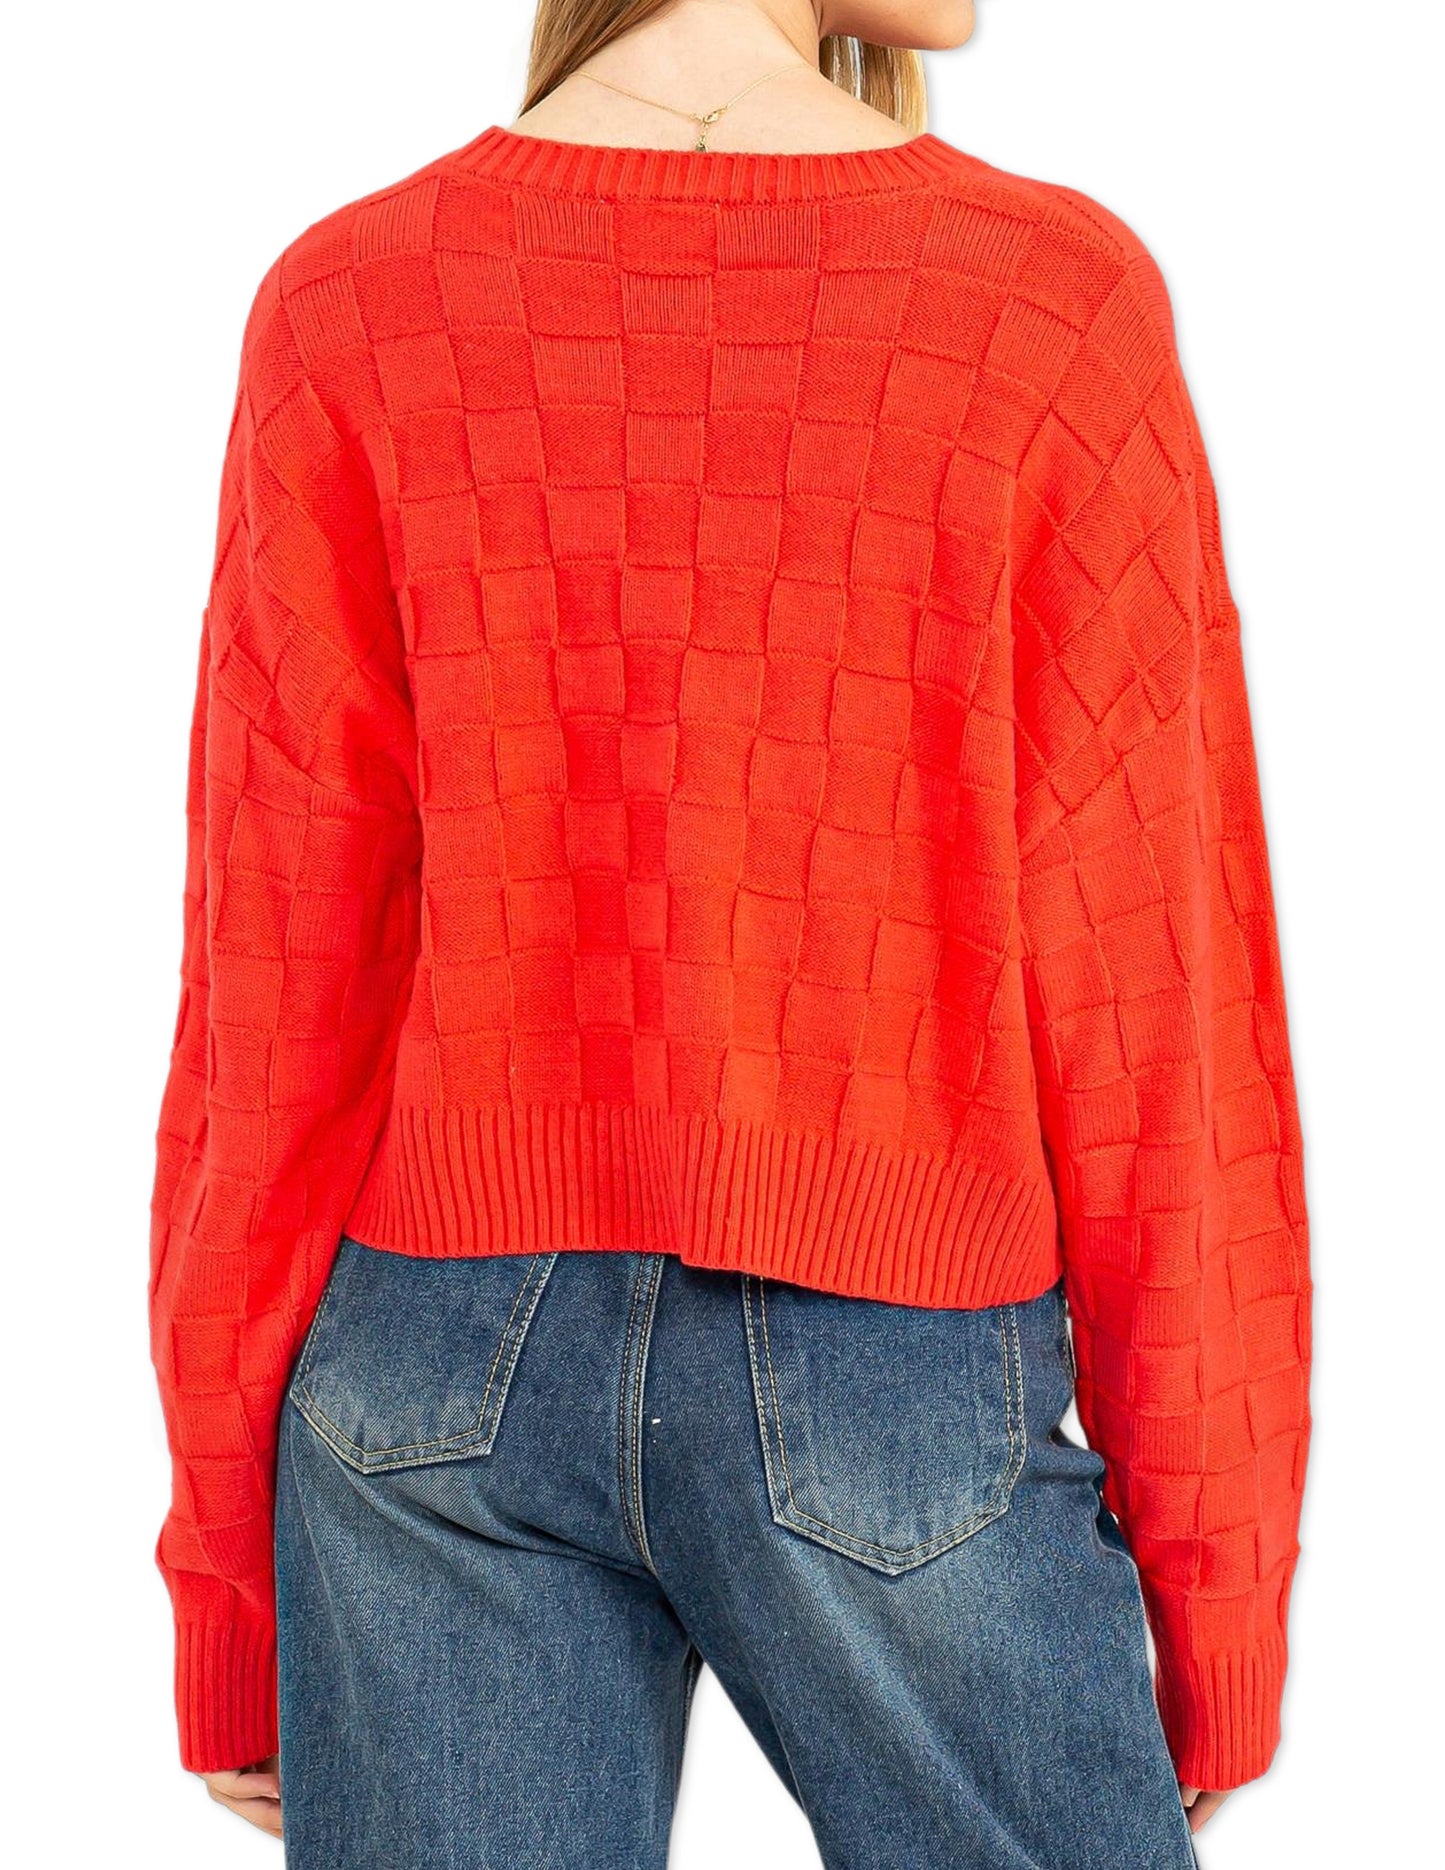 Square Texture Long Sleeve Sweater - Red